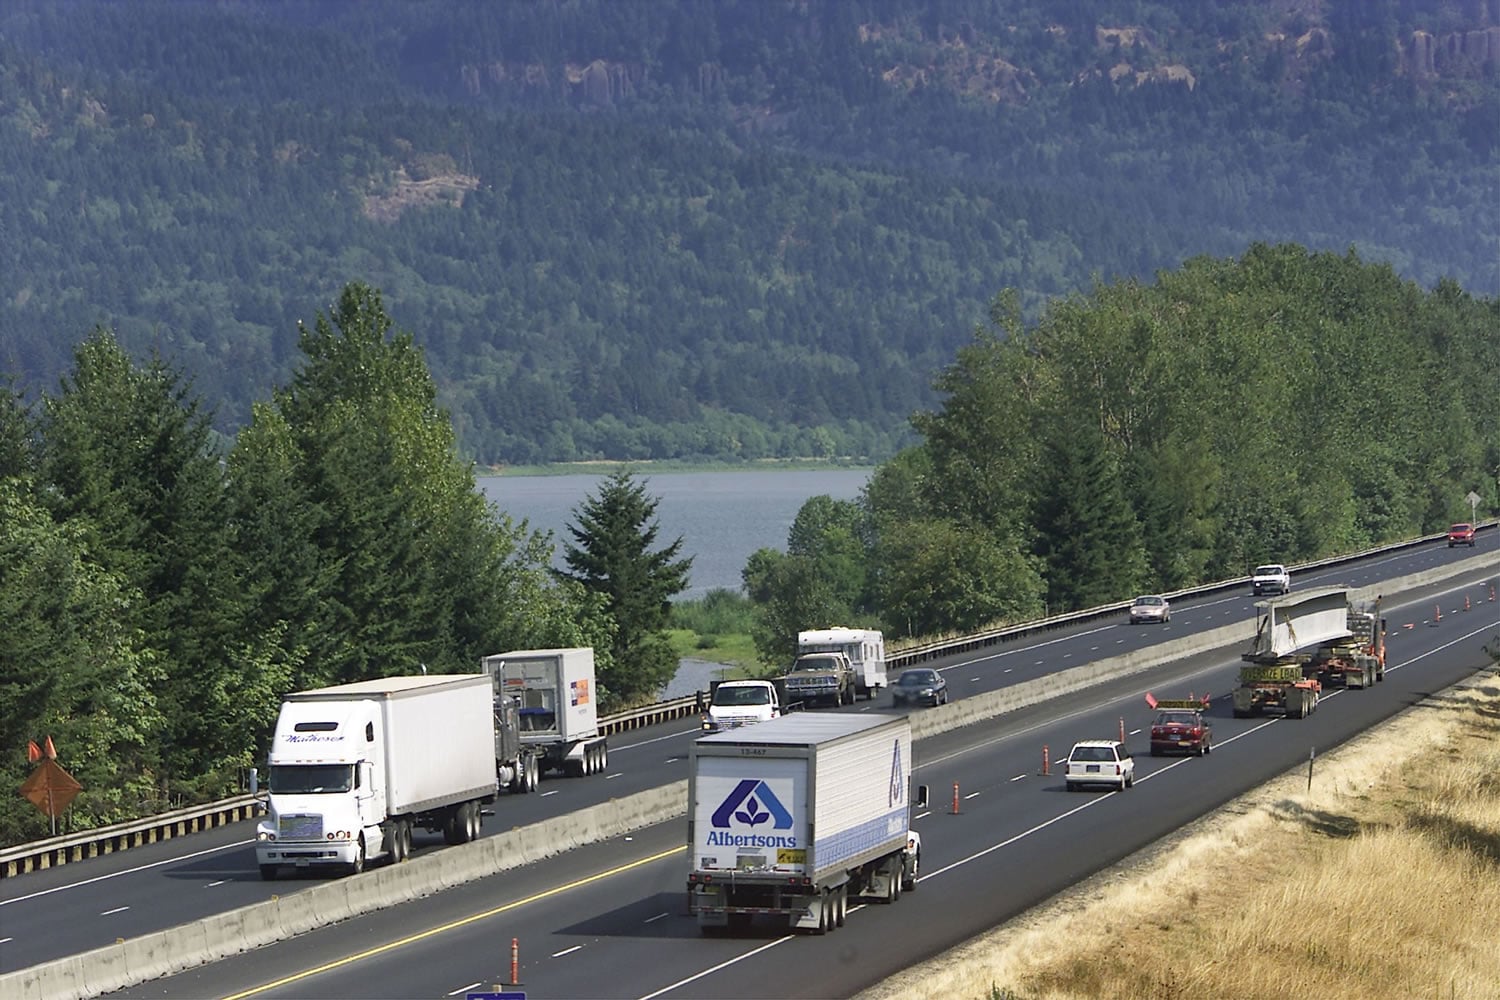 Diesel truck emissions are one contributor to haze in the Columbia River Gorge, but ultra-low sulfur fuels and more stringent emission standards help reduce the pollutants.